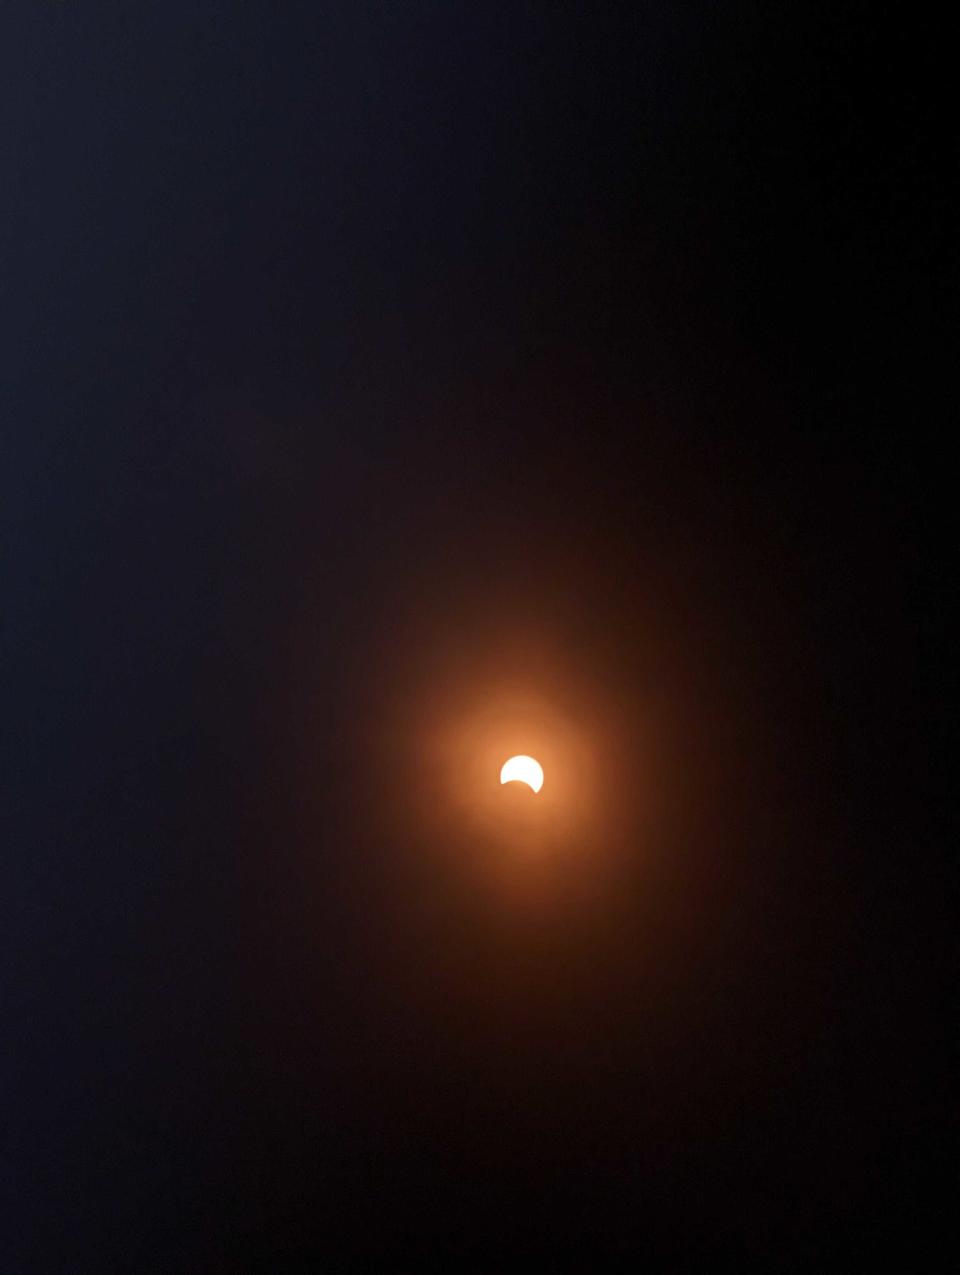 The April 8 eclipse taken from a Pixel 7 Pro